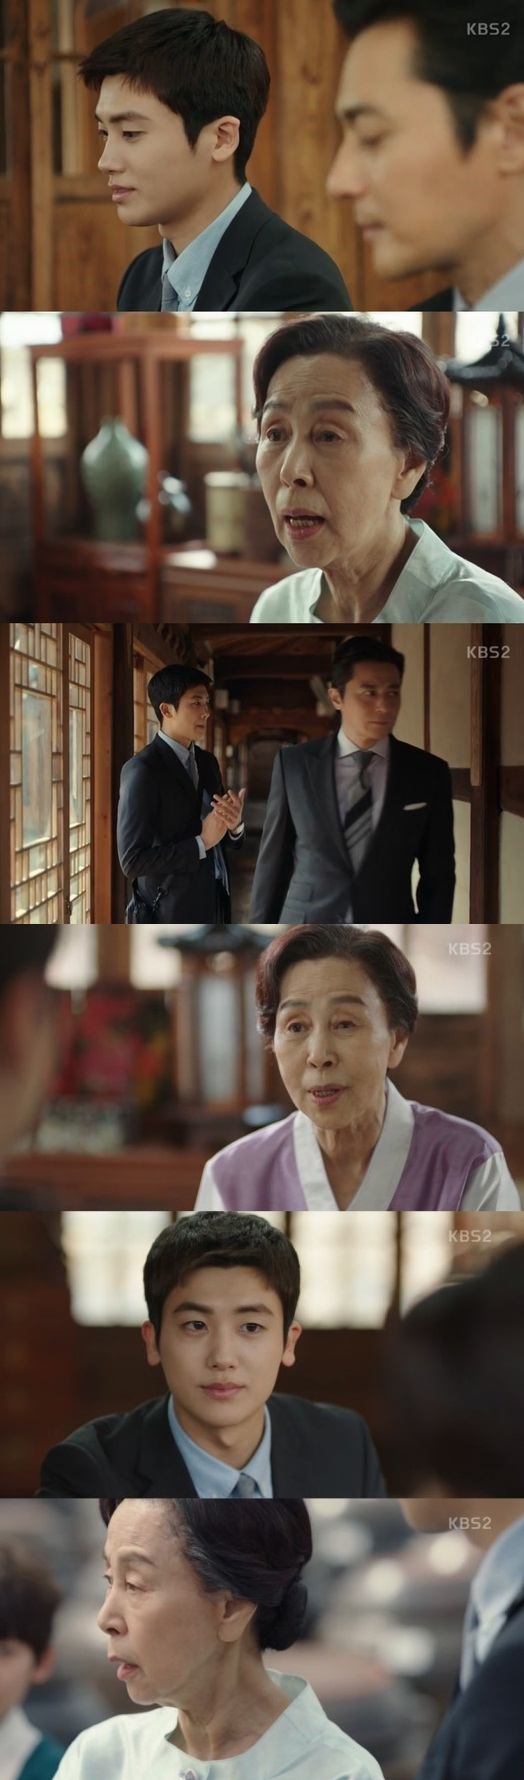 On the third day of KBSs Suits, Suits was broadcast on the air, when Yeon Woo (Park Hyung-sik) was working as a ship by Kang Suk (Jang Dong-gun) and Ada Lovelace (Son Sook) was a craftsman who made a traditional chapter. The Kang Suk had to encourage the ship Ada Lovelace to establish a United States of America corporation, and Yeon Woo said, My grandmother can not even think about this.Ada Lovelace is great, and Ada Lovelace opens her mind to Yeon Woo.Kang Suk then went to Yeon Woo and Ada Lovelace to persuade him again, but Ada Lovelace said, I am old.It is better to see with my grandchildren now, he said, not needing United States of America.At the same time, Choi Kang Suk confronted former couple Na Ju-hee (Jang Shin-young) in a divorce lawsuit, creating a strange tension.Choi won the divorce case and made the settlement as he wanted. Meanwhile, Yeon Woo worried that Kang Suk might have been disappointed with him.Gina (Go Sung-hee) said, It is Choi who is disappointed.If you know that Choi had an inevitable situation, he said. Choi is a very good lawyer, so you will not look at the other person.Are you not going to defend yourself as a great lawyer? 